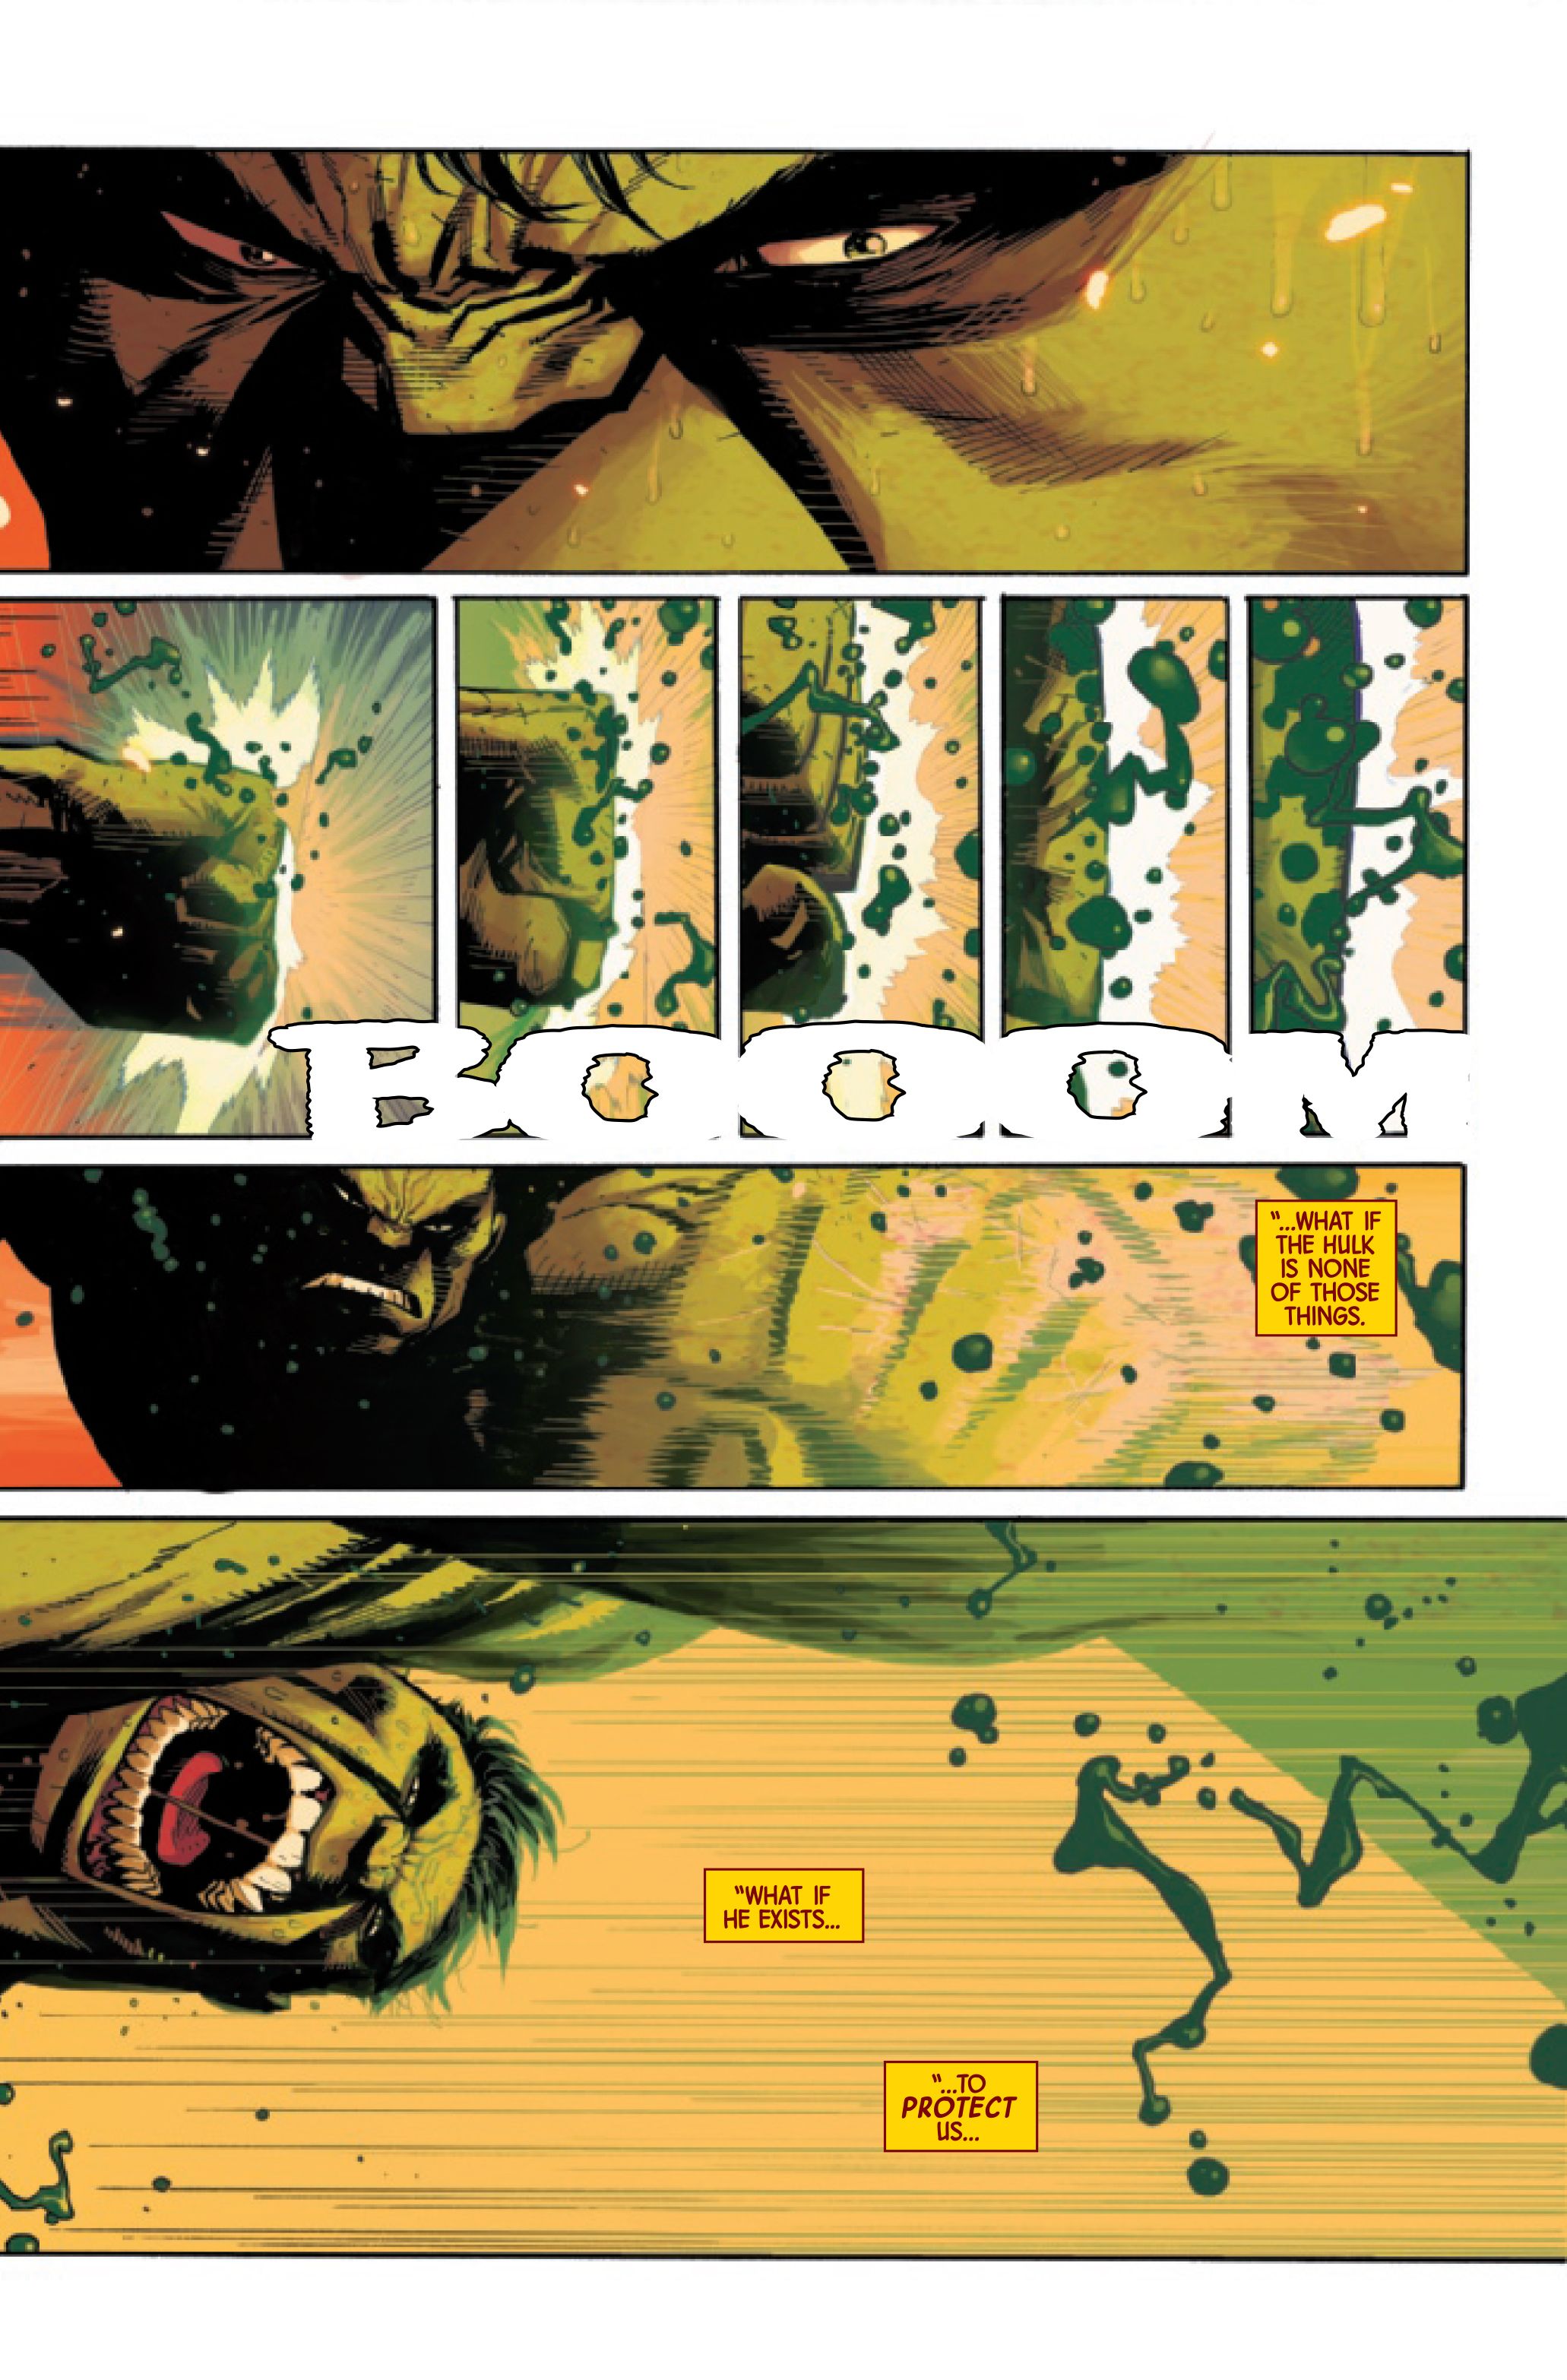 Page 3 of Hulk #1, by Donny Cates, Ryan Ottley and Frank Martin.